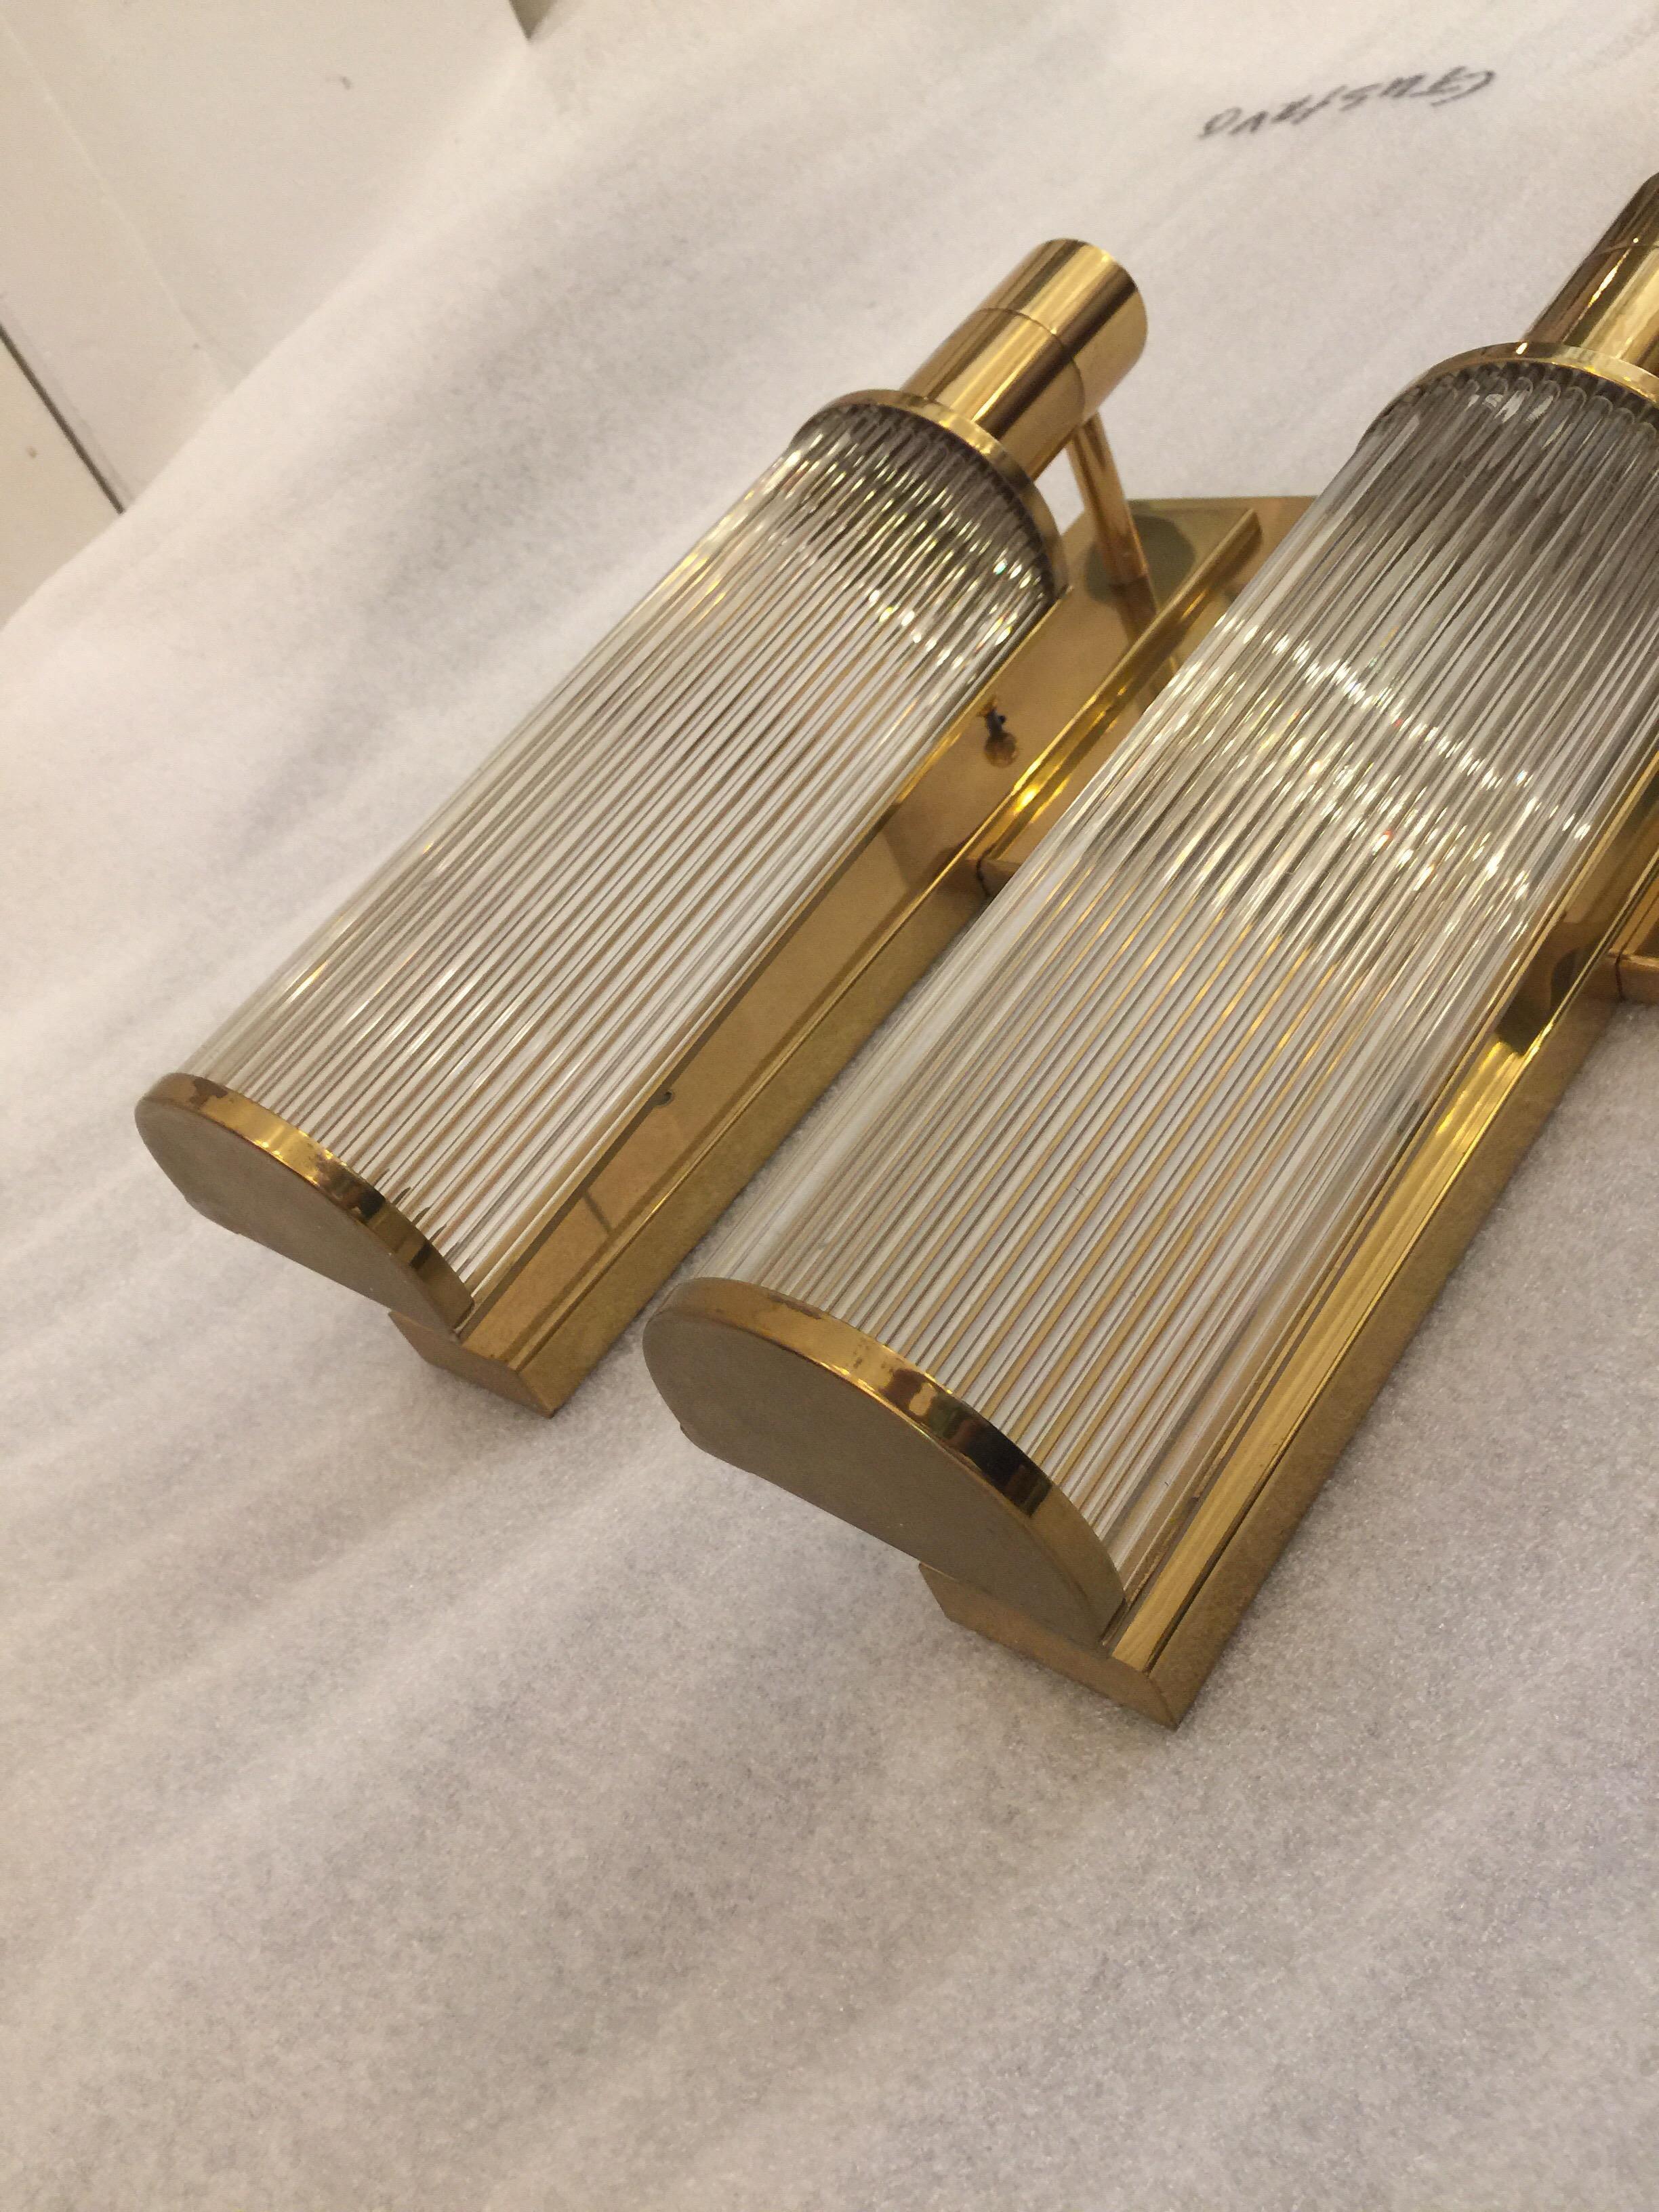 Art Deco Pair of Casella Brass and Glass Rod Wall Sconces